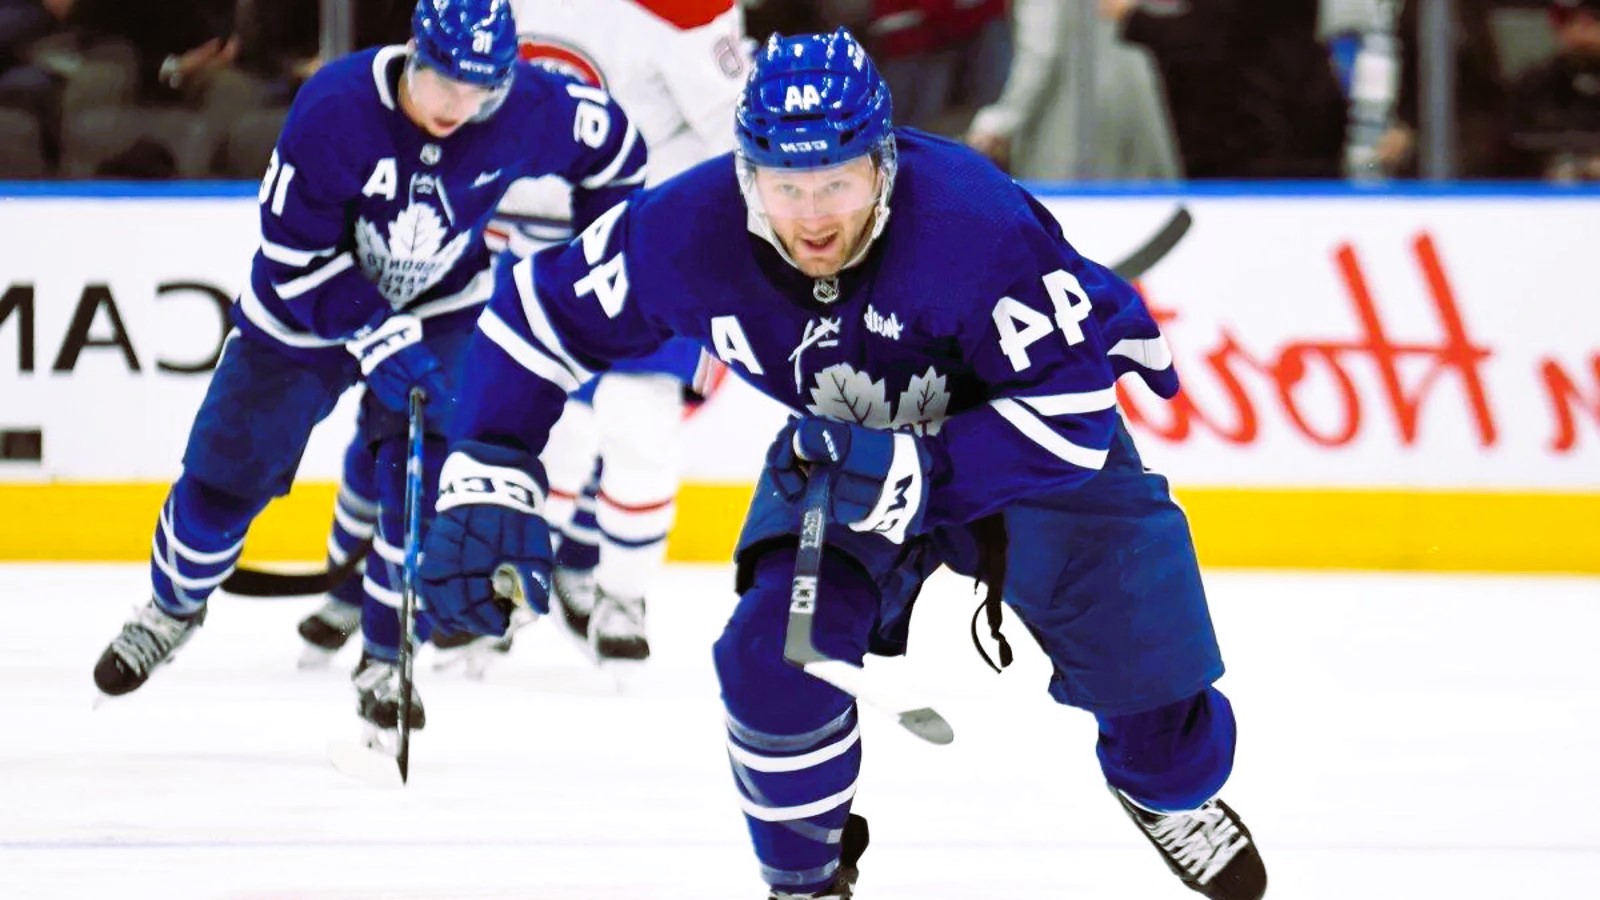 Leafs Defenceman Rielly Suspended Five Games